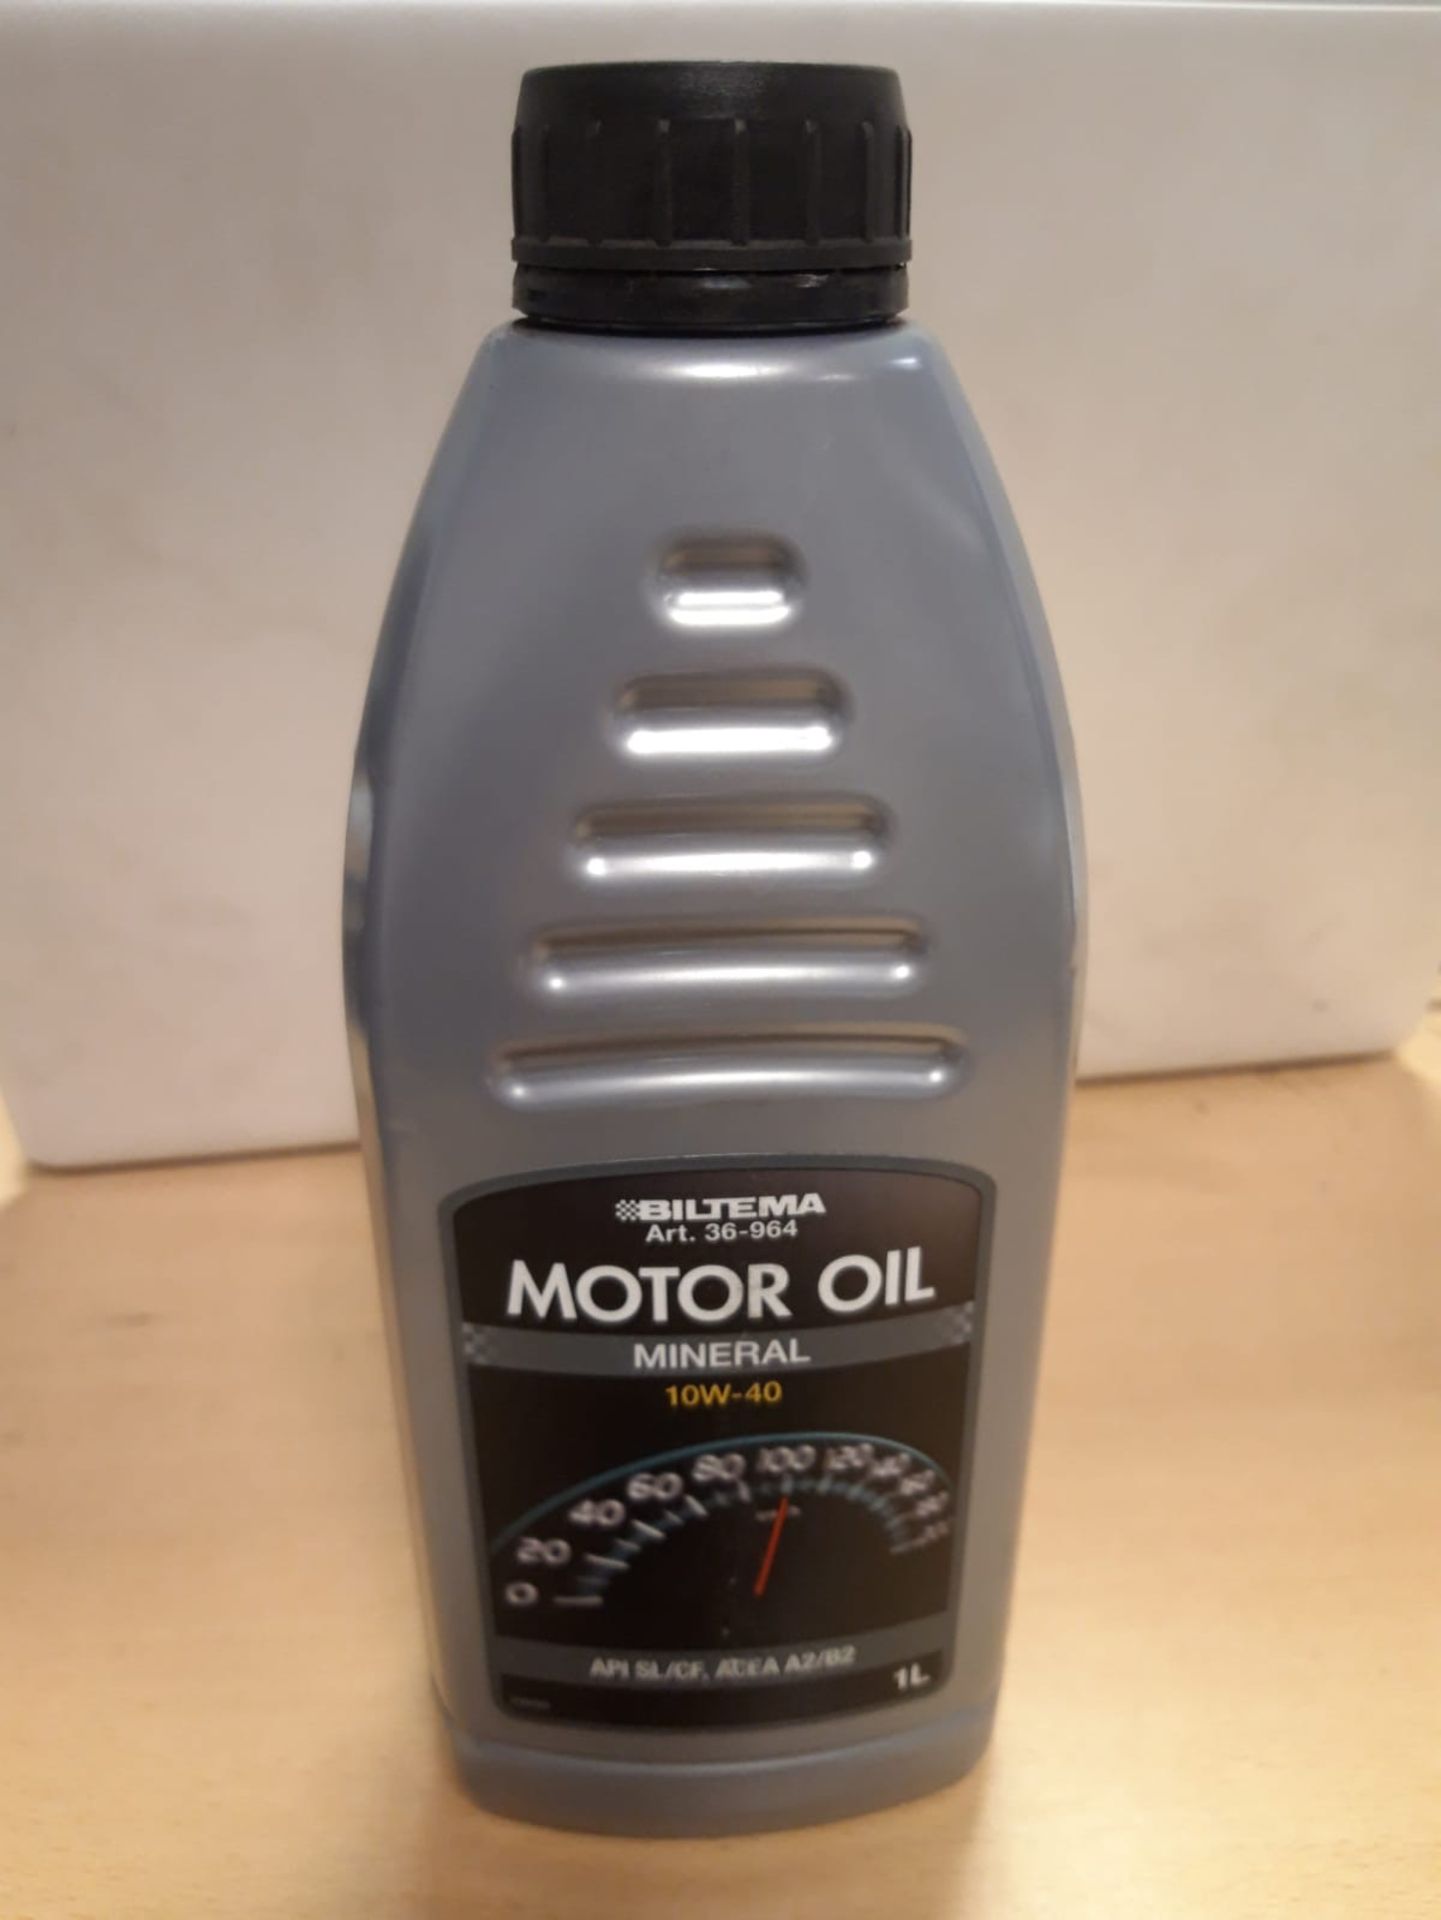 (1) 60 x 1L BILTEMA 10W 40 MOTOR OIL MINERAL. NEW STOCK. UK DELIVERY AVAILABLE.